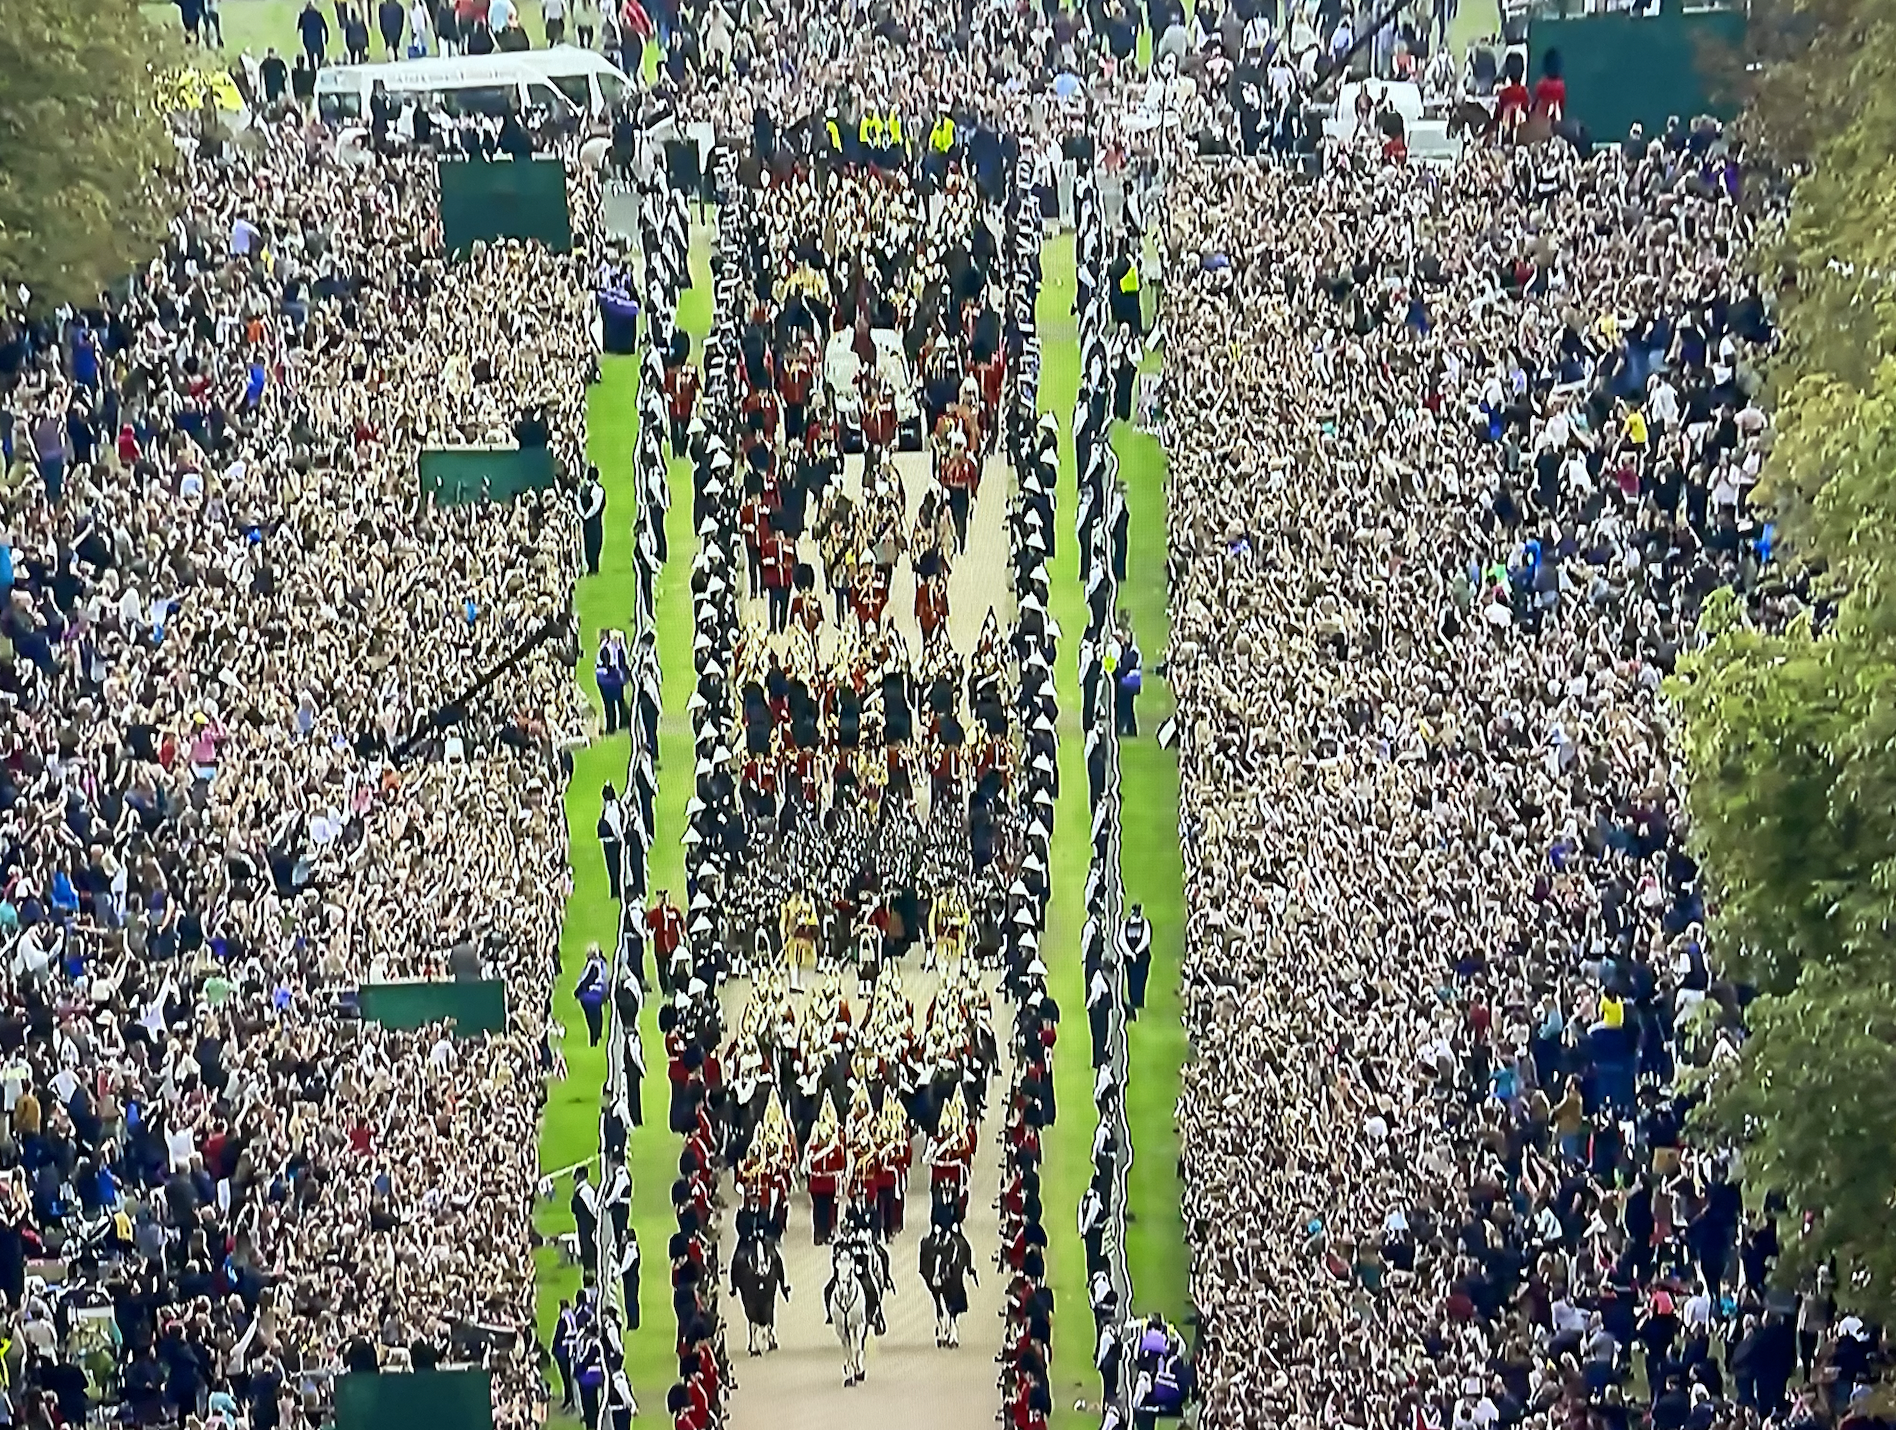 Thousands waited hours to get a final glimpse of the Queen